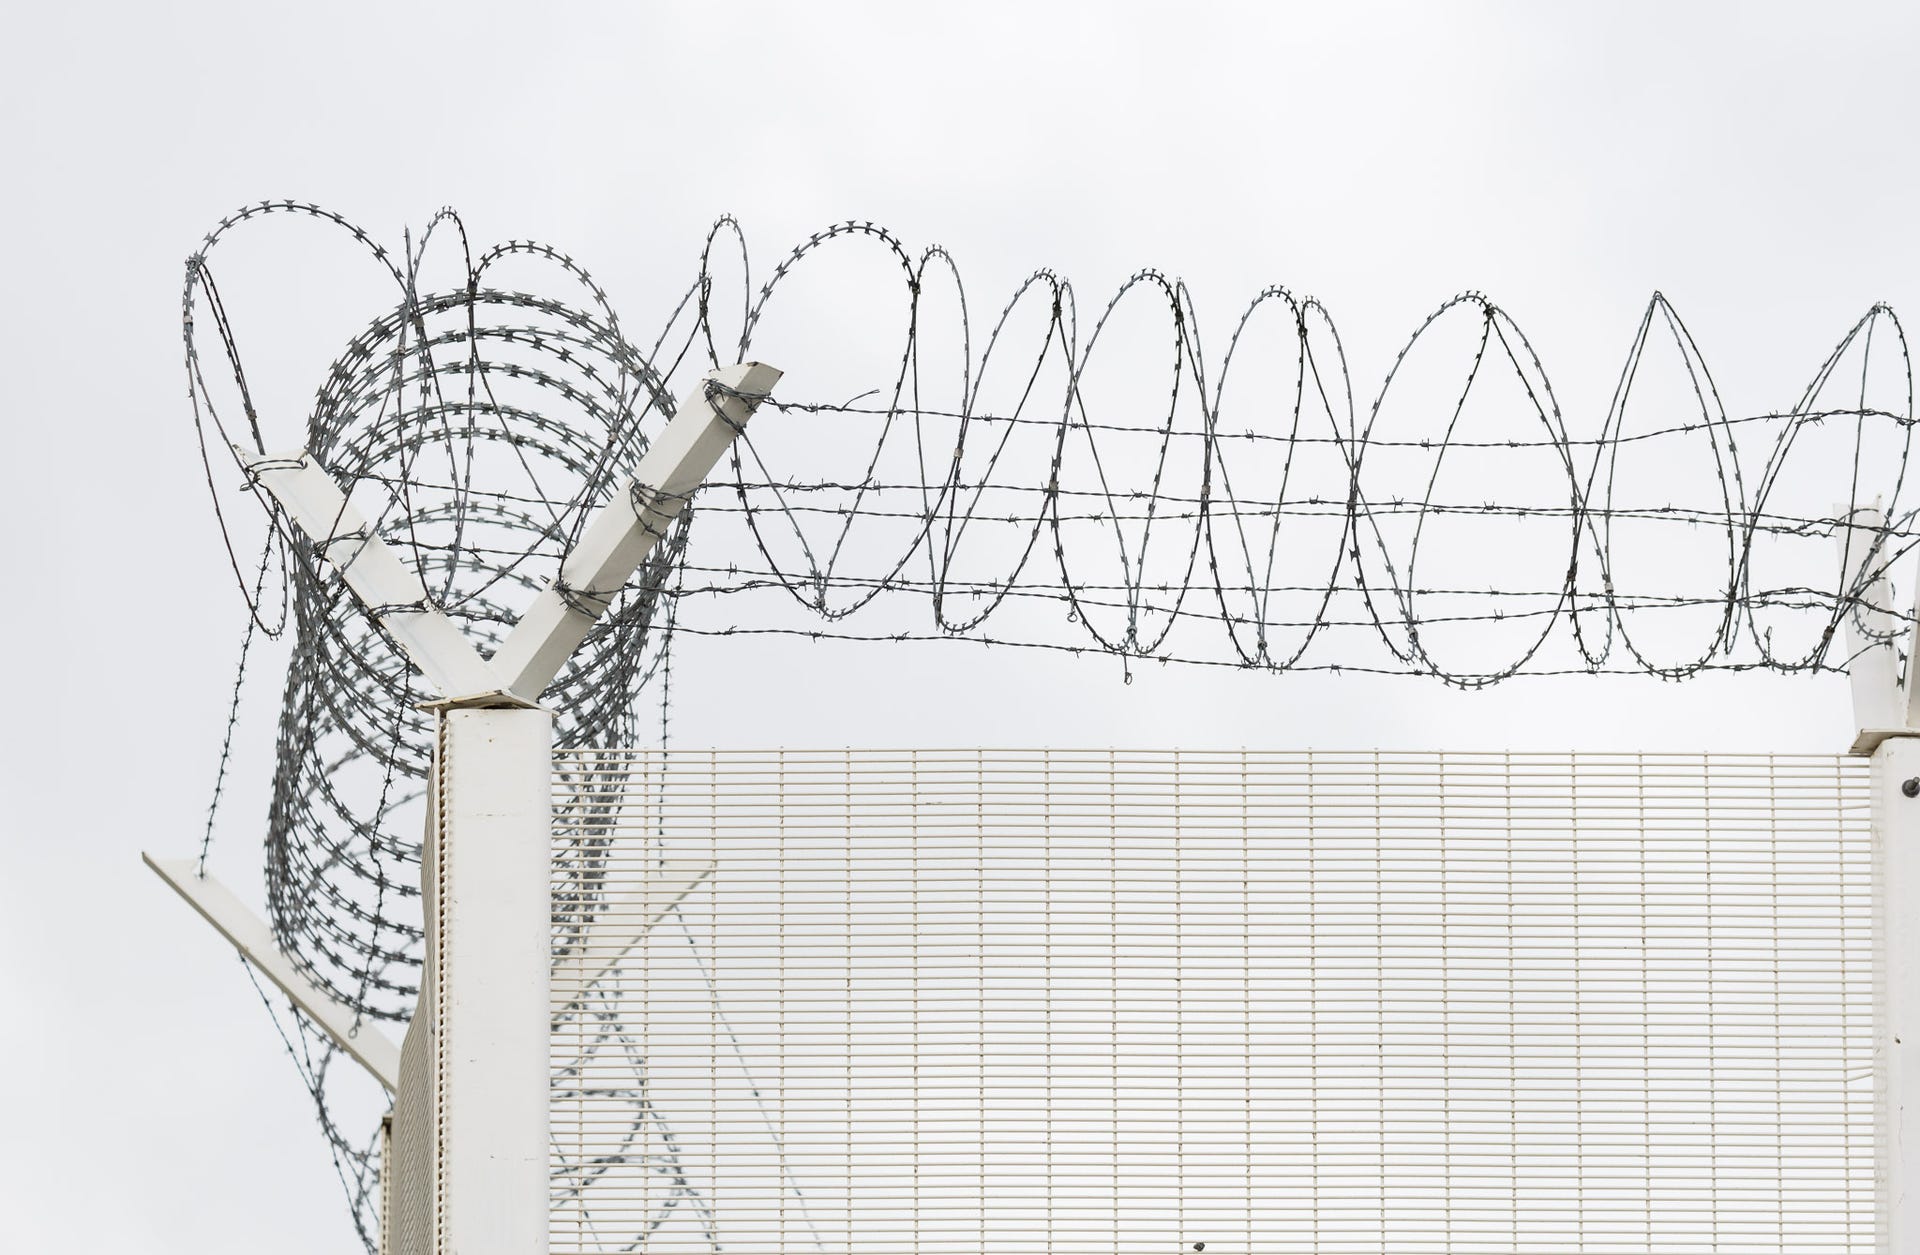 20160615-barbed-wire-001.jpg